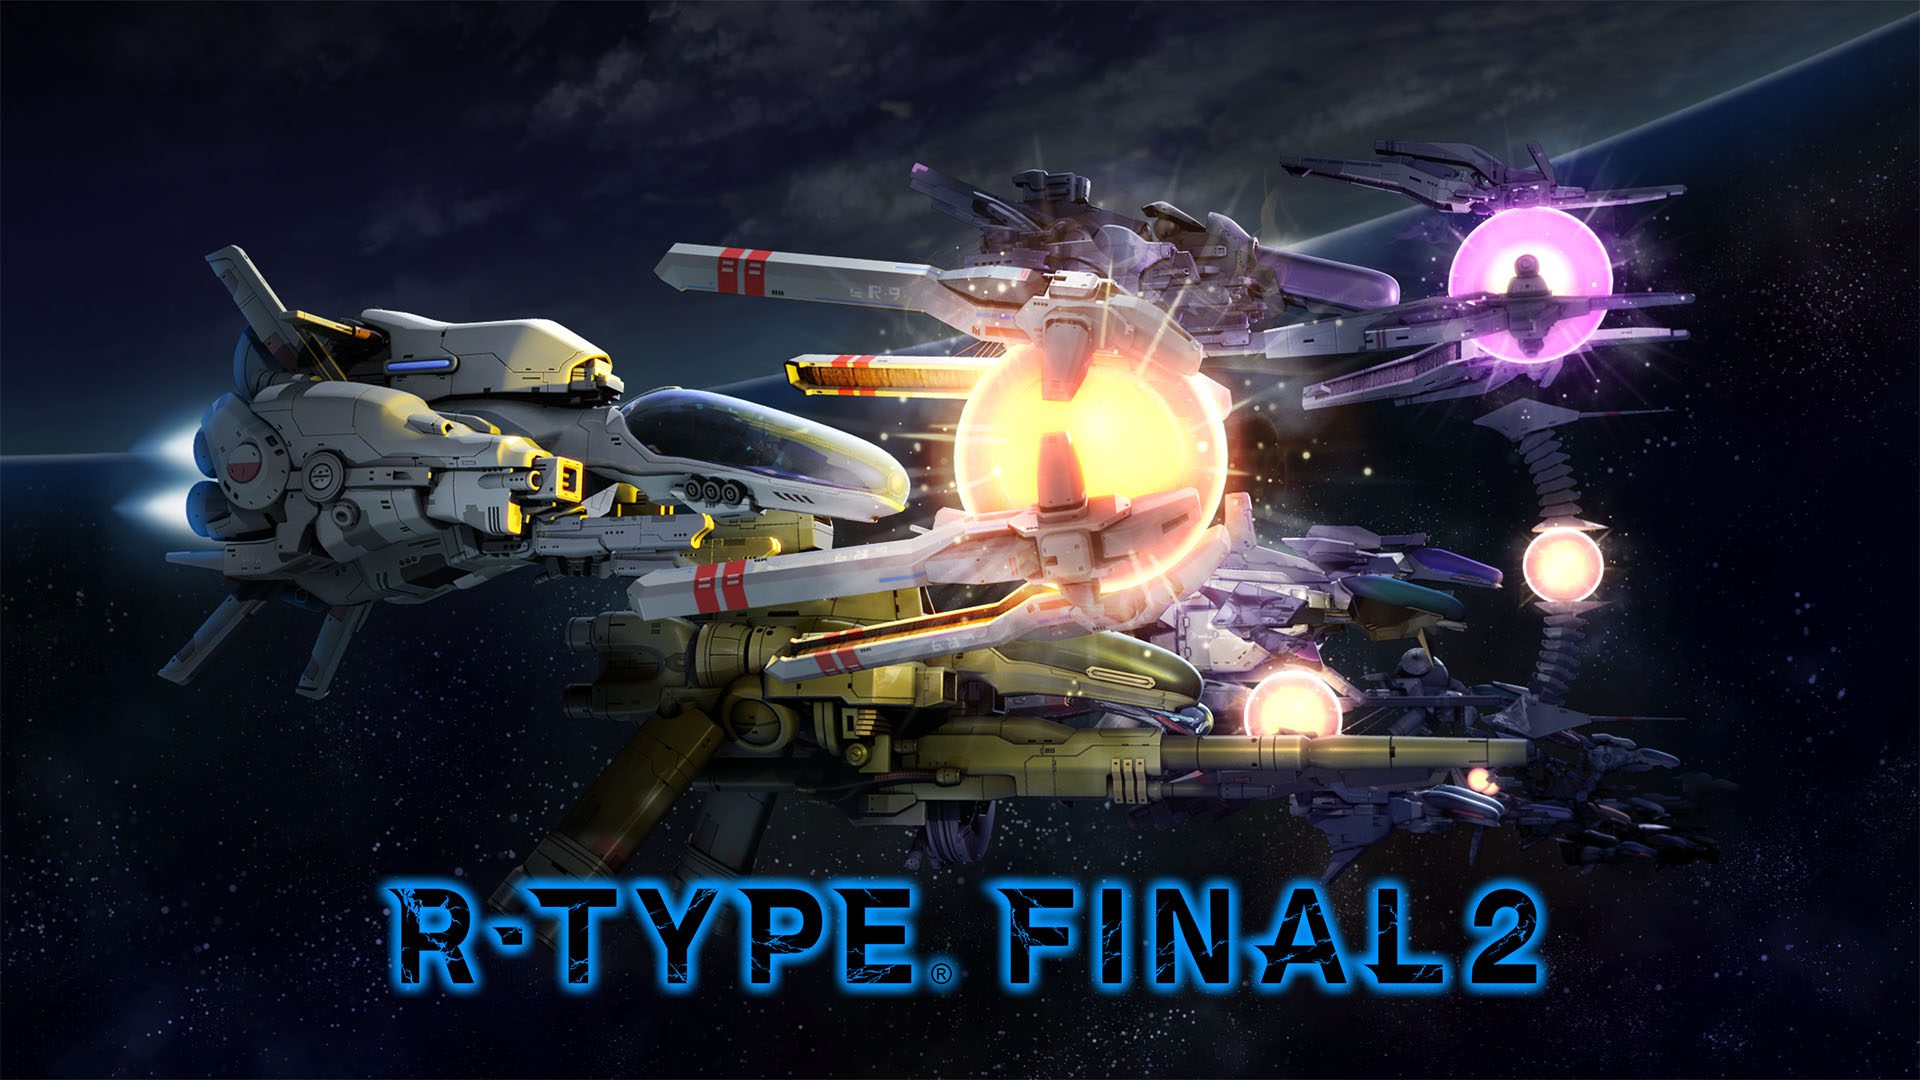 R-Type Final 2 Kickstarter looks to revive the series